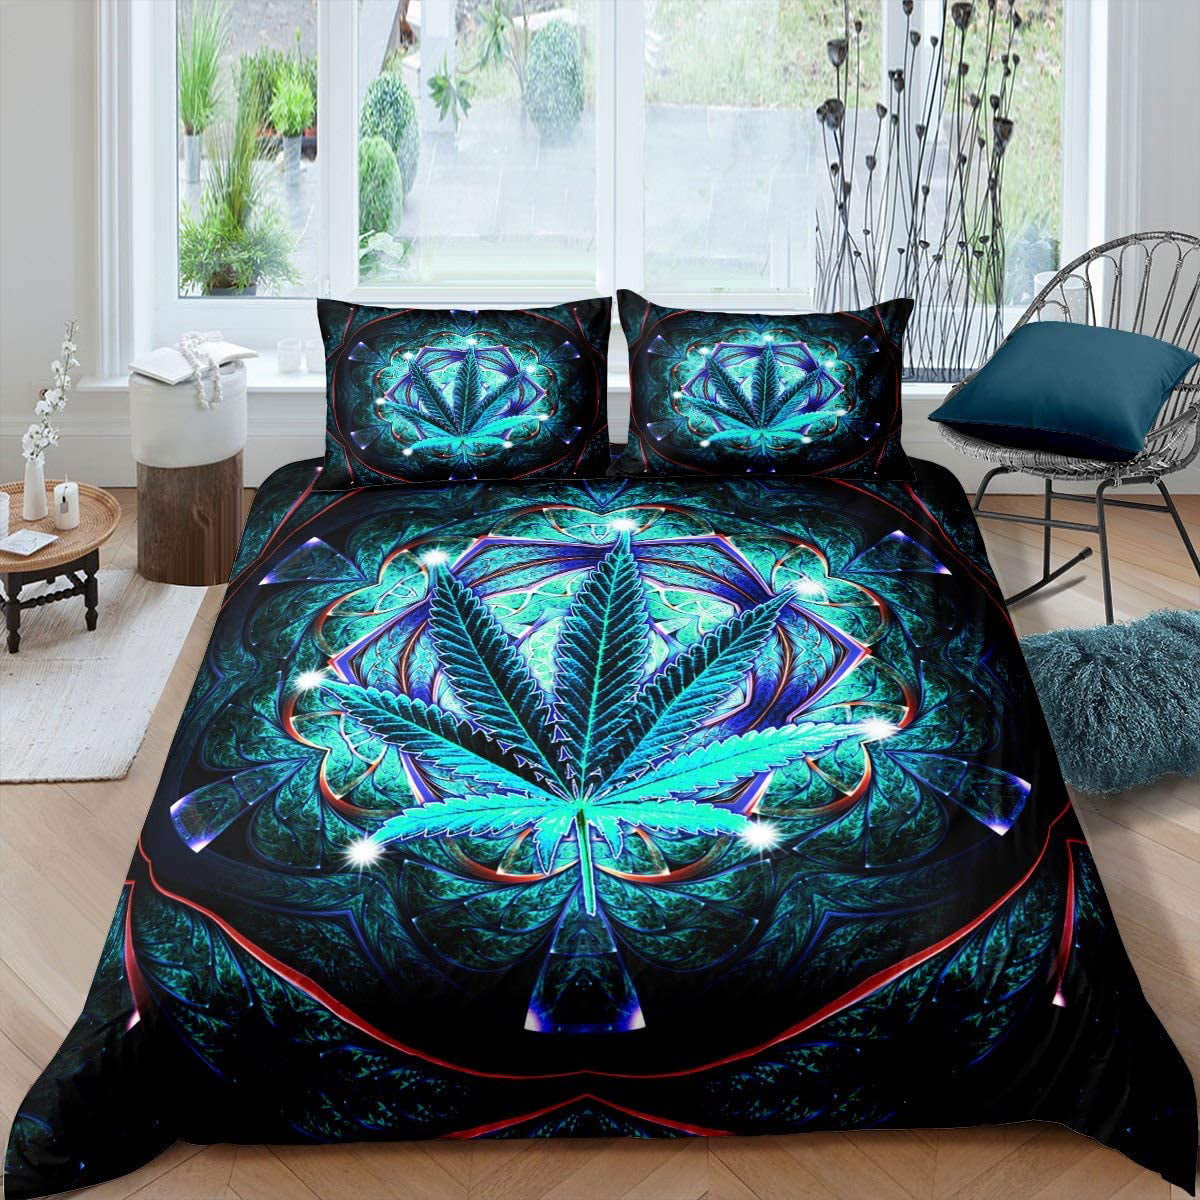 Marijuana Weed Leaf Duvet Cover Set Teens Gothic Skull Skeleton Bedding Set Queen for Boys Men Youth Bedroom Decor Green Cannabis Smoky Comforter Cover Black White Bedspread Cover with 2 Pillow Case